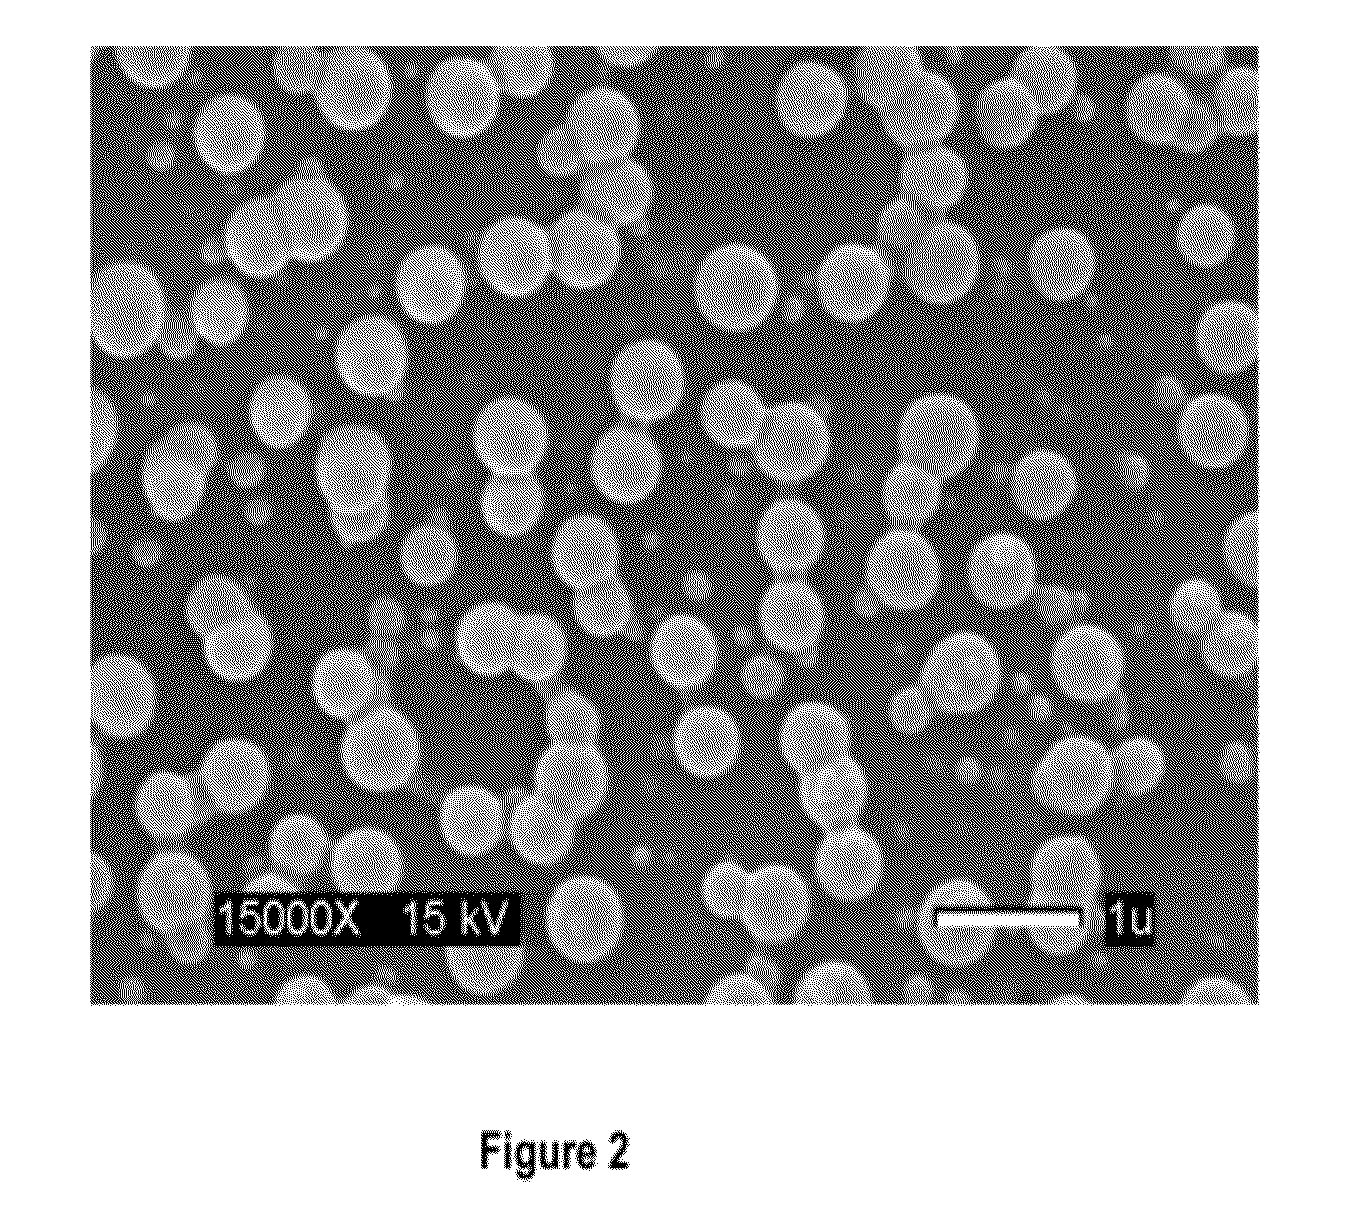 Stealth polymeric particles for delivery of bioactive or diagnostic agents